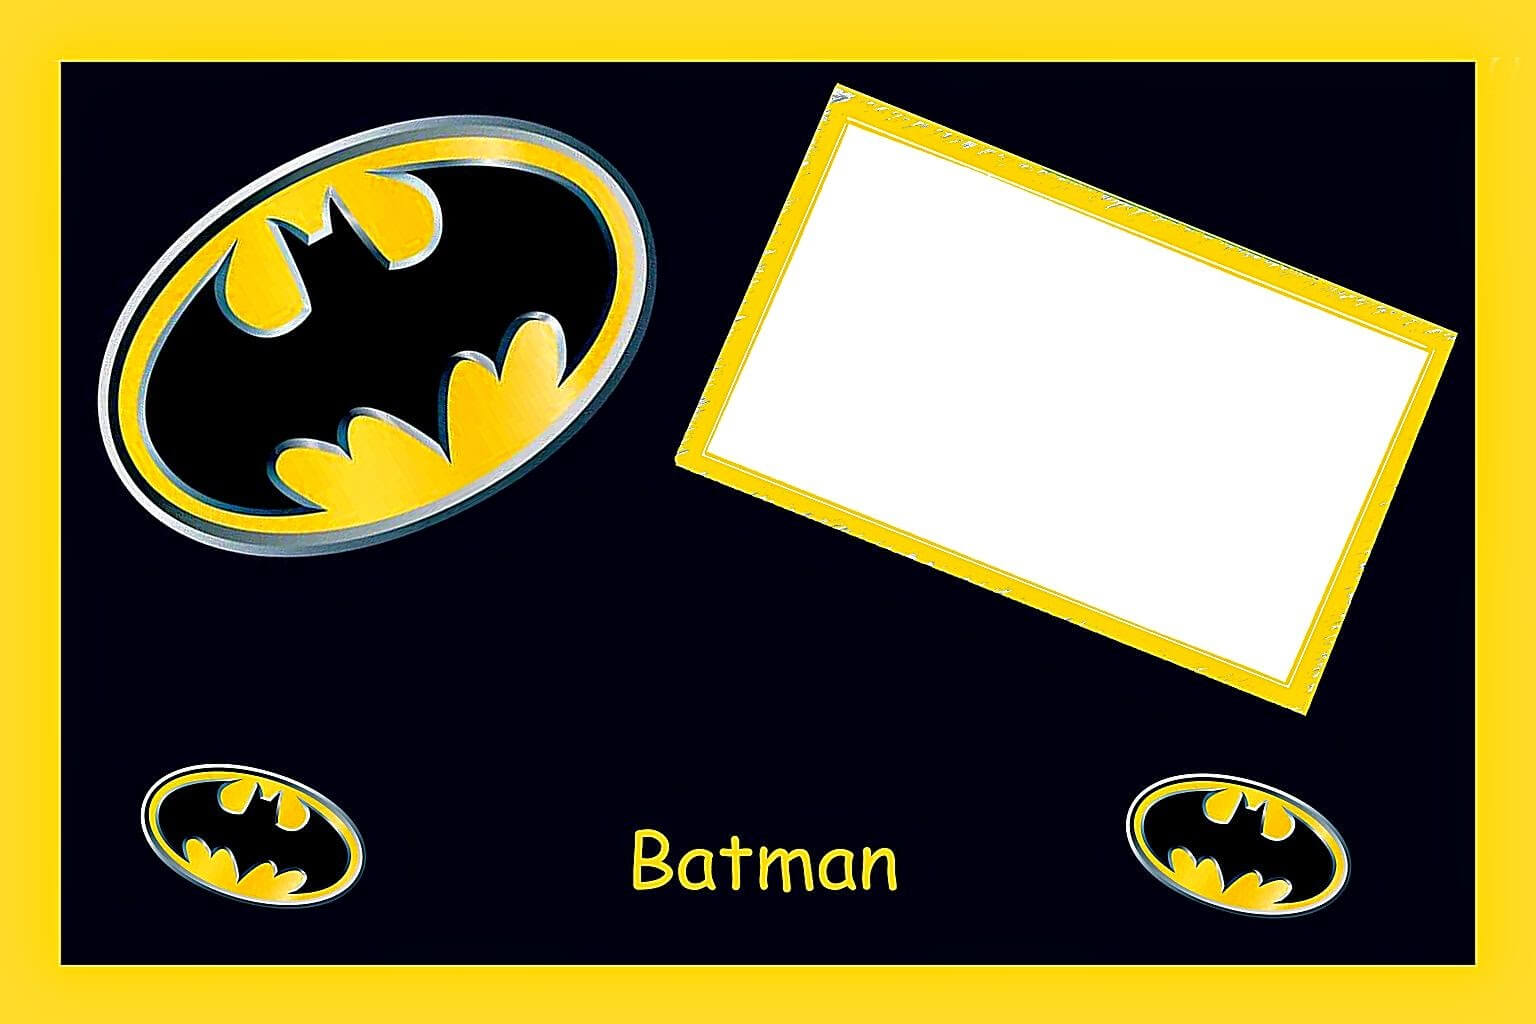 Batman Birthday: Free Printable Cards Or Invitations. - Oh Intended For Batman Birthday Card Template